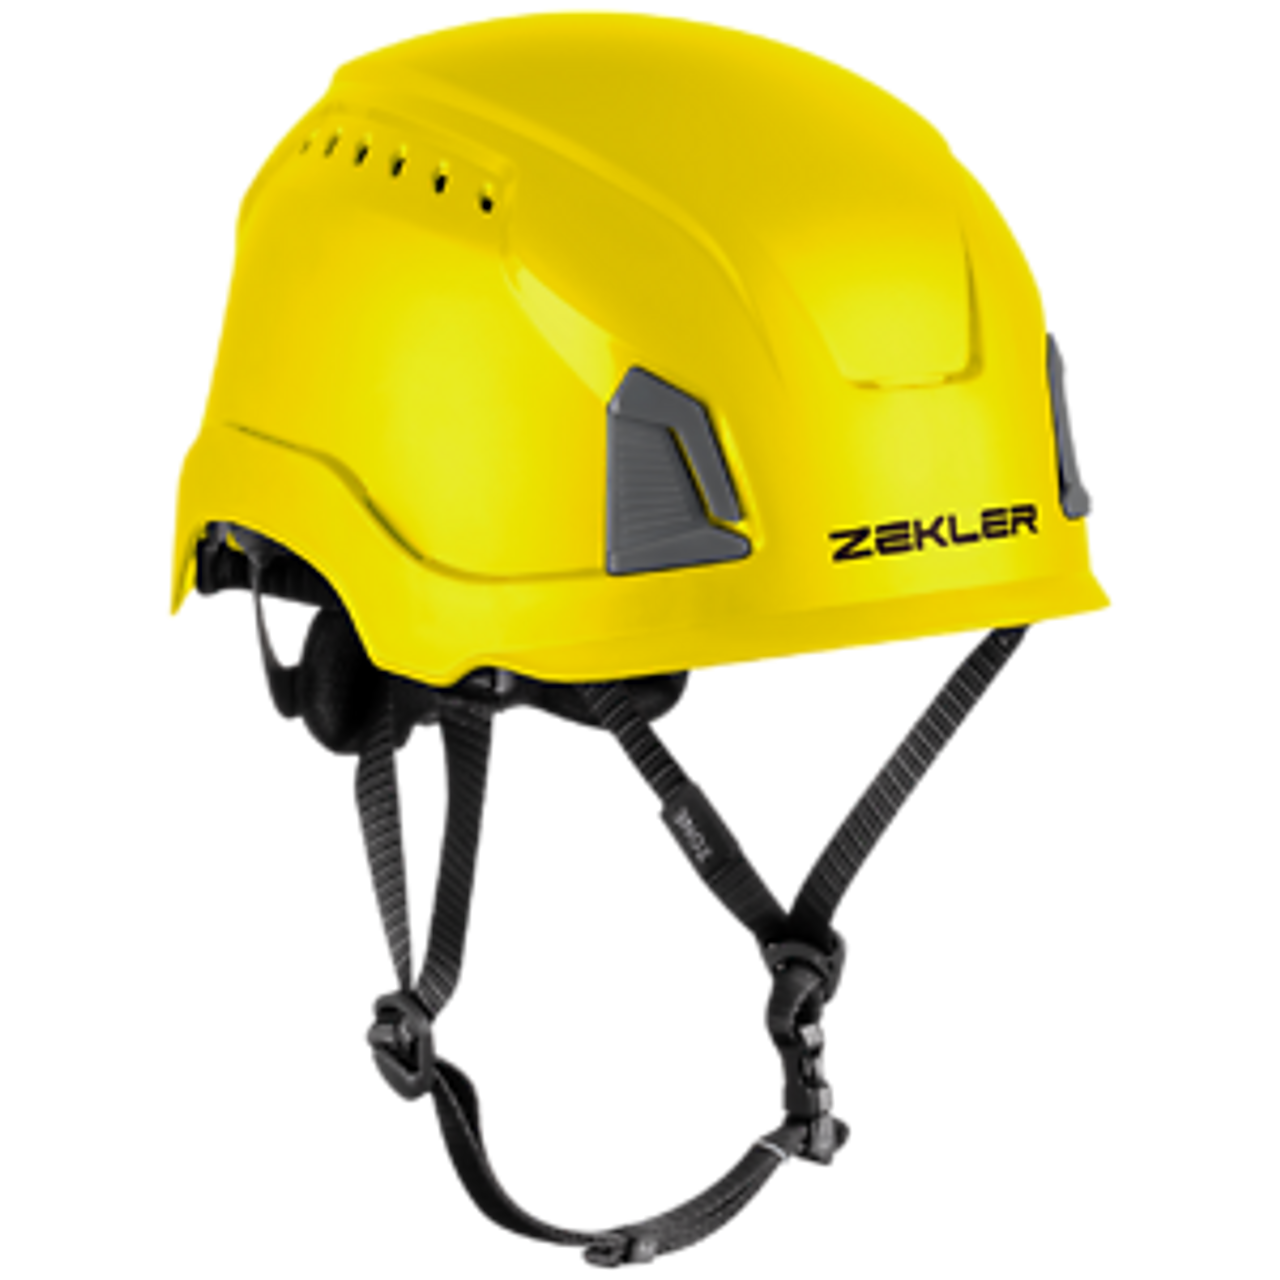 ZEKLER Helmet | ZONE Standard Yellow Technical Safety Helmet  with Chinstraps for Rope Access, Electricians to create a total tool solution for construction.